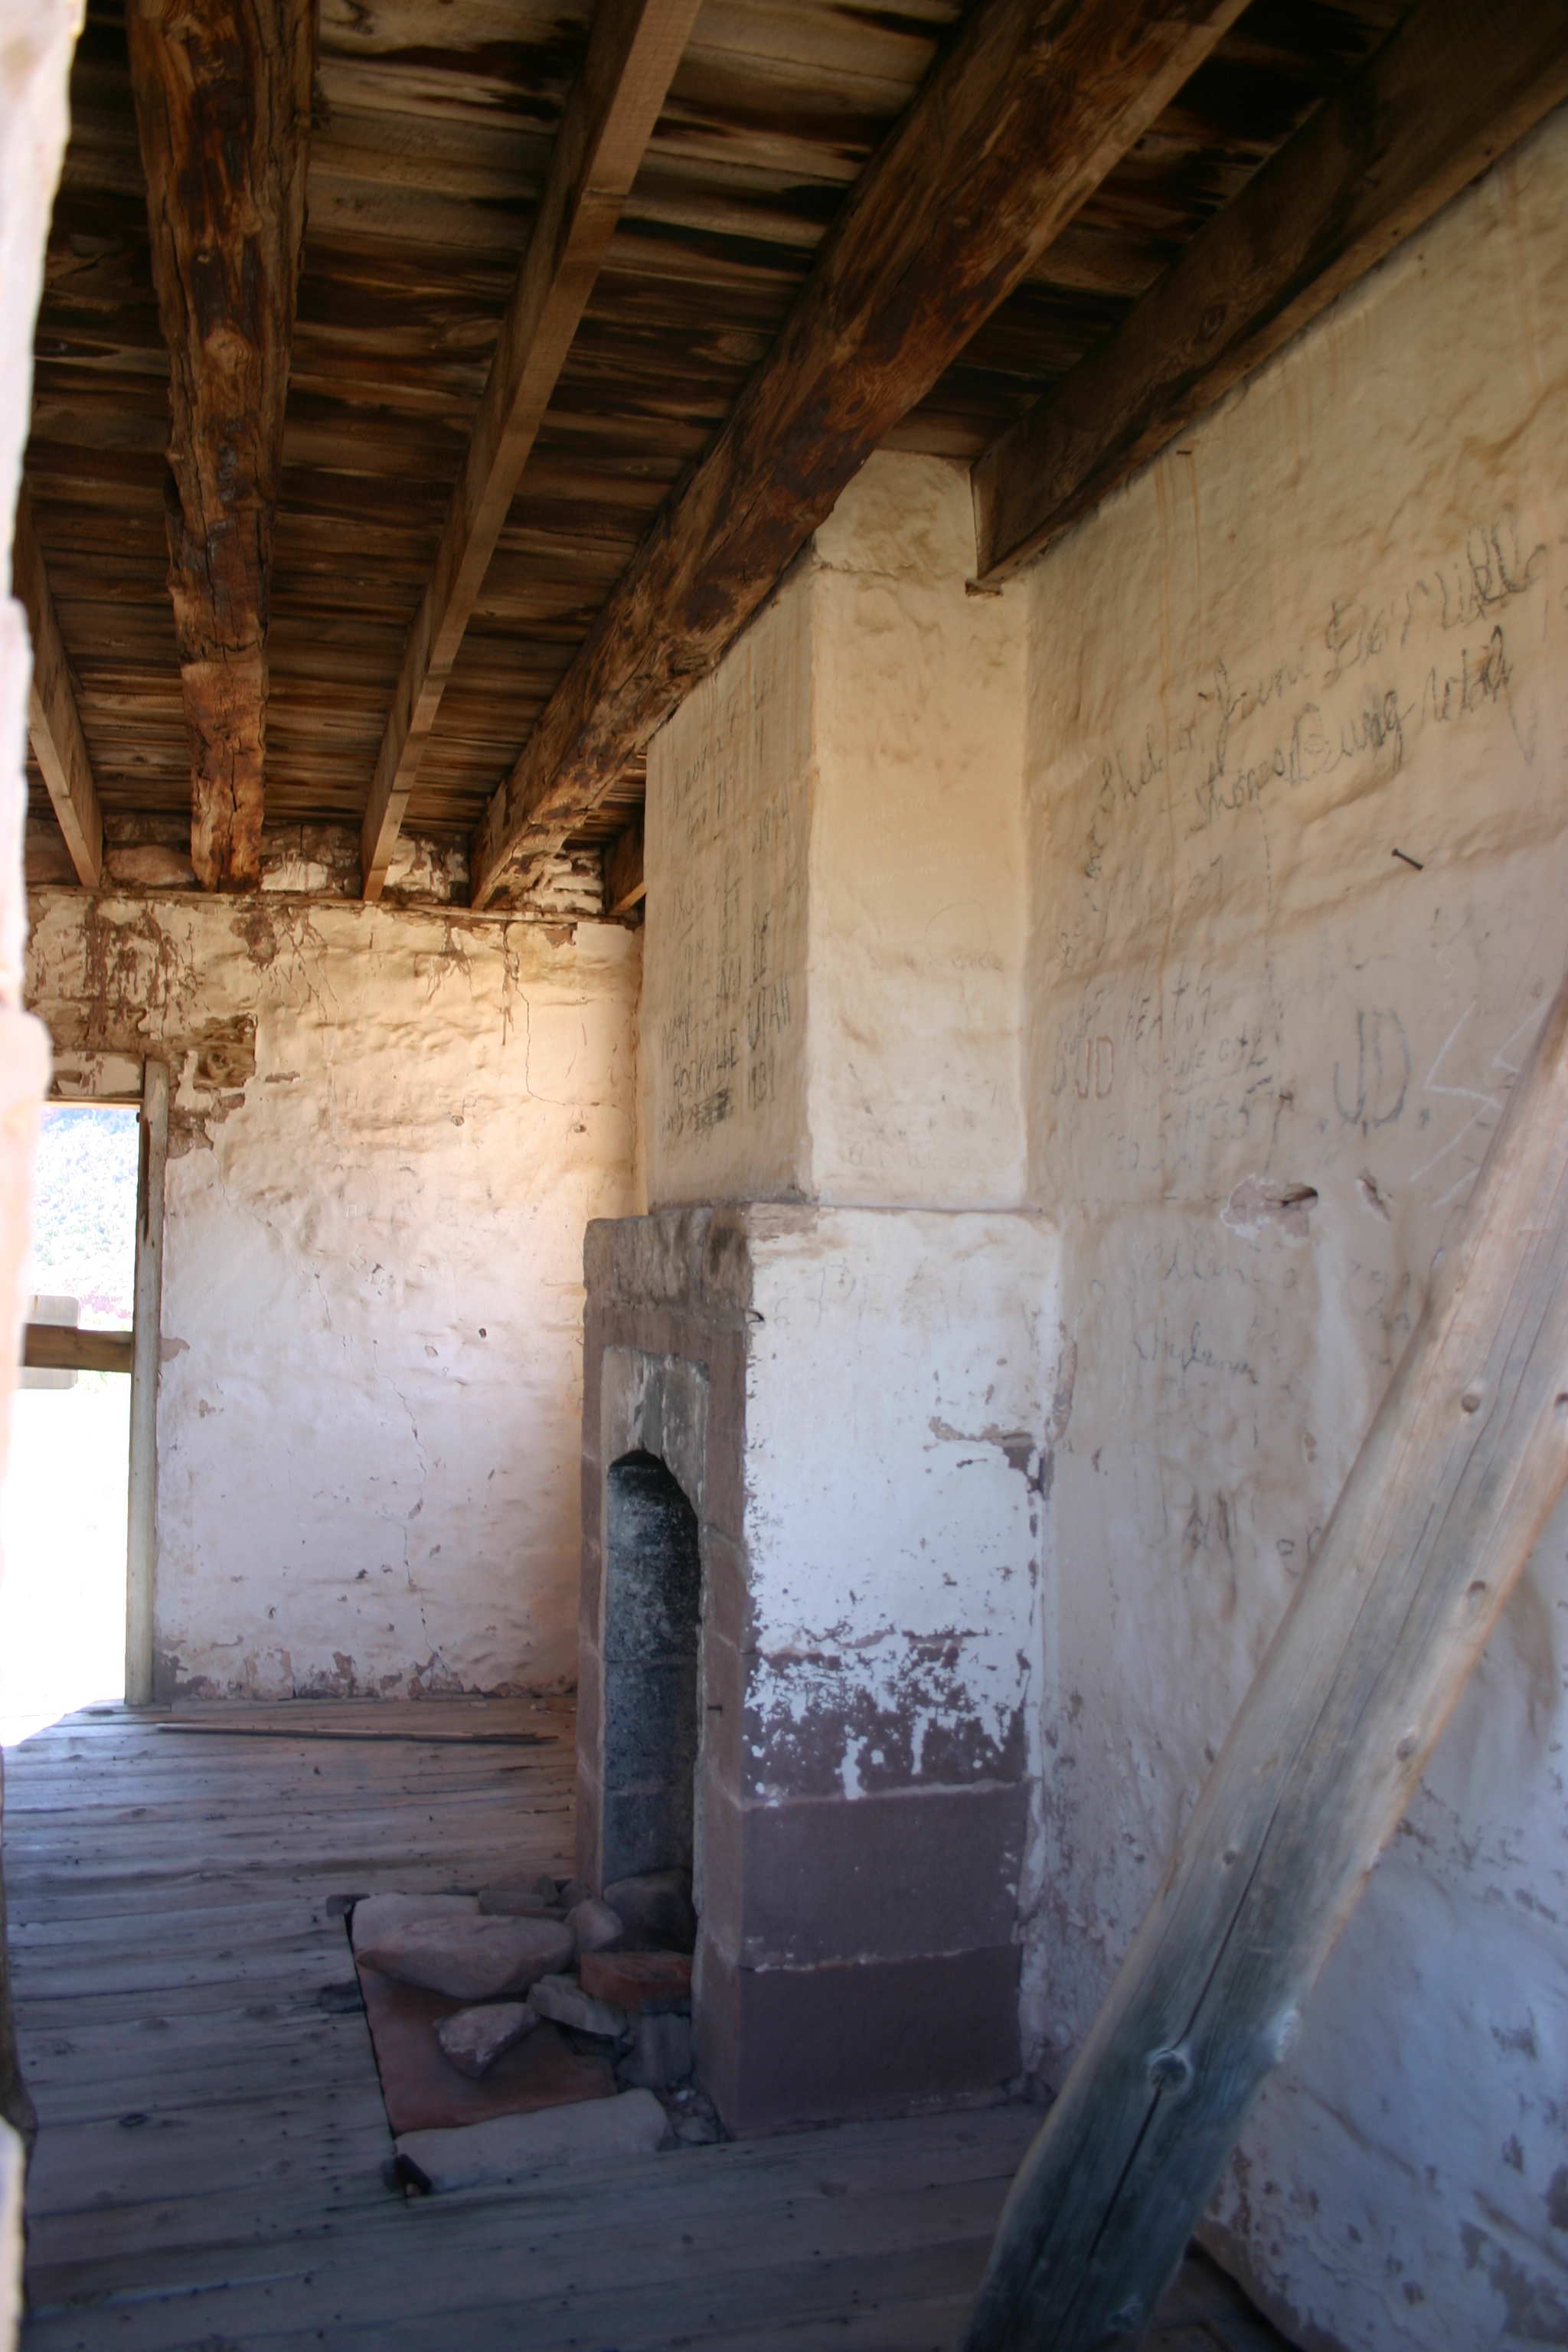 Fireplace and interior of the DeMille Rock House at Shunesburg